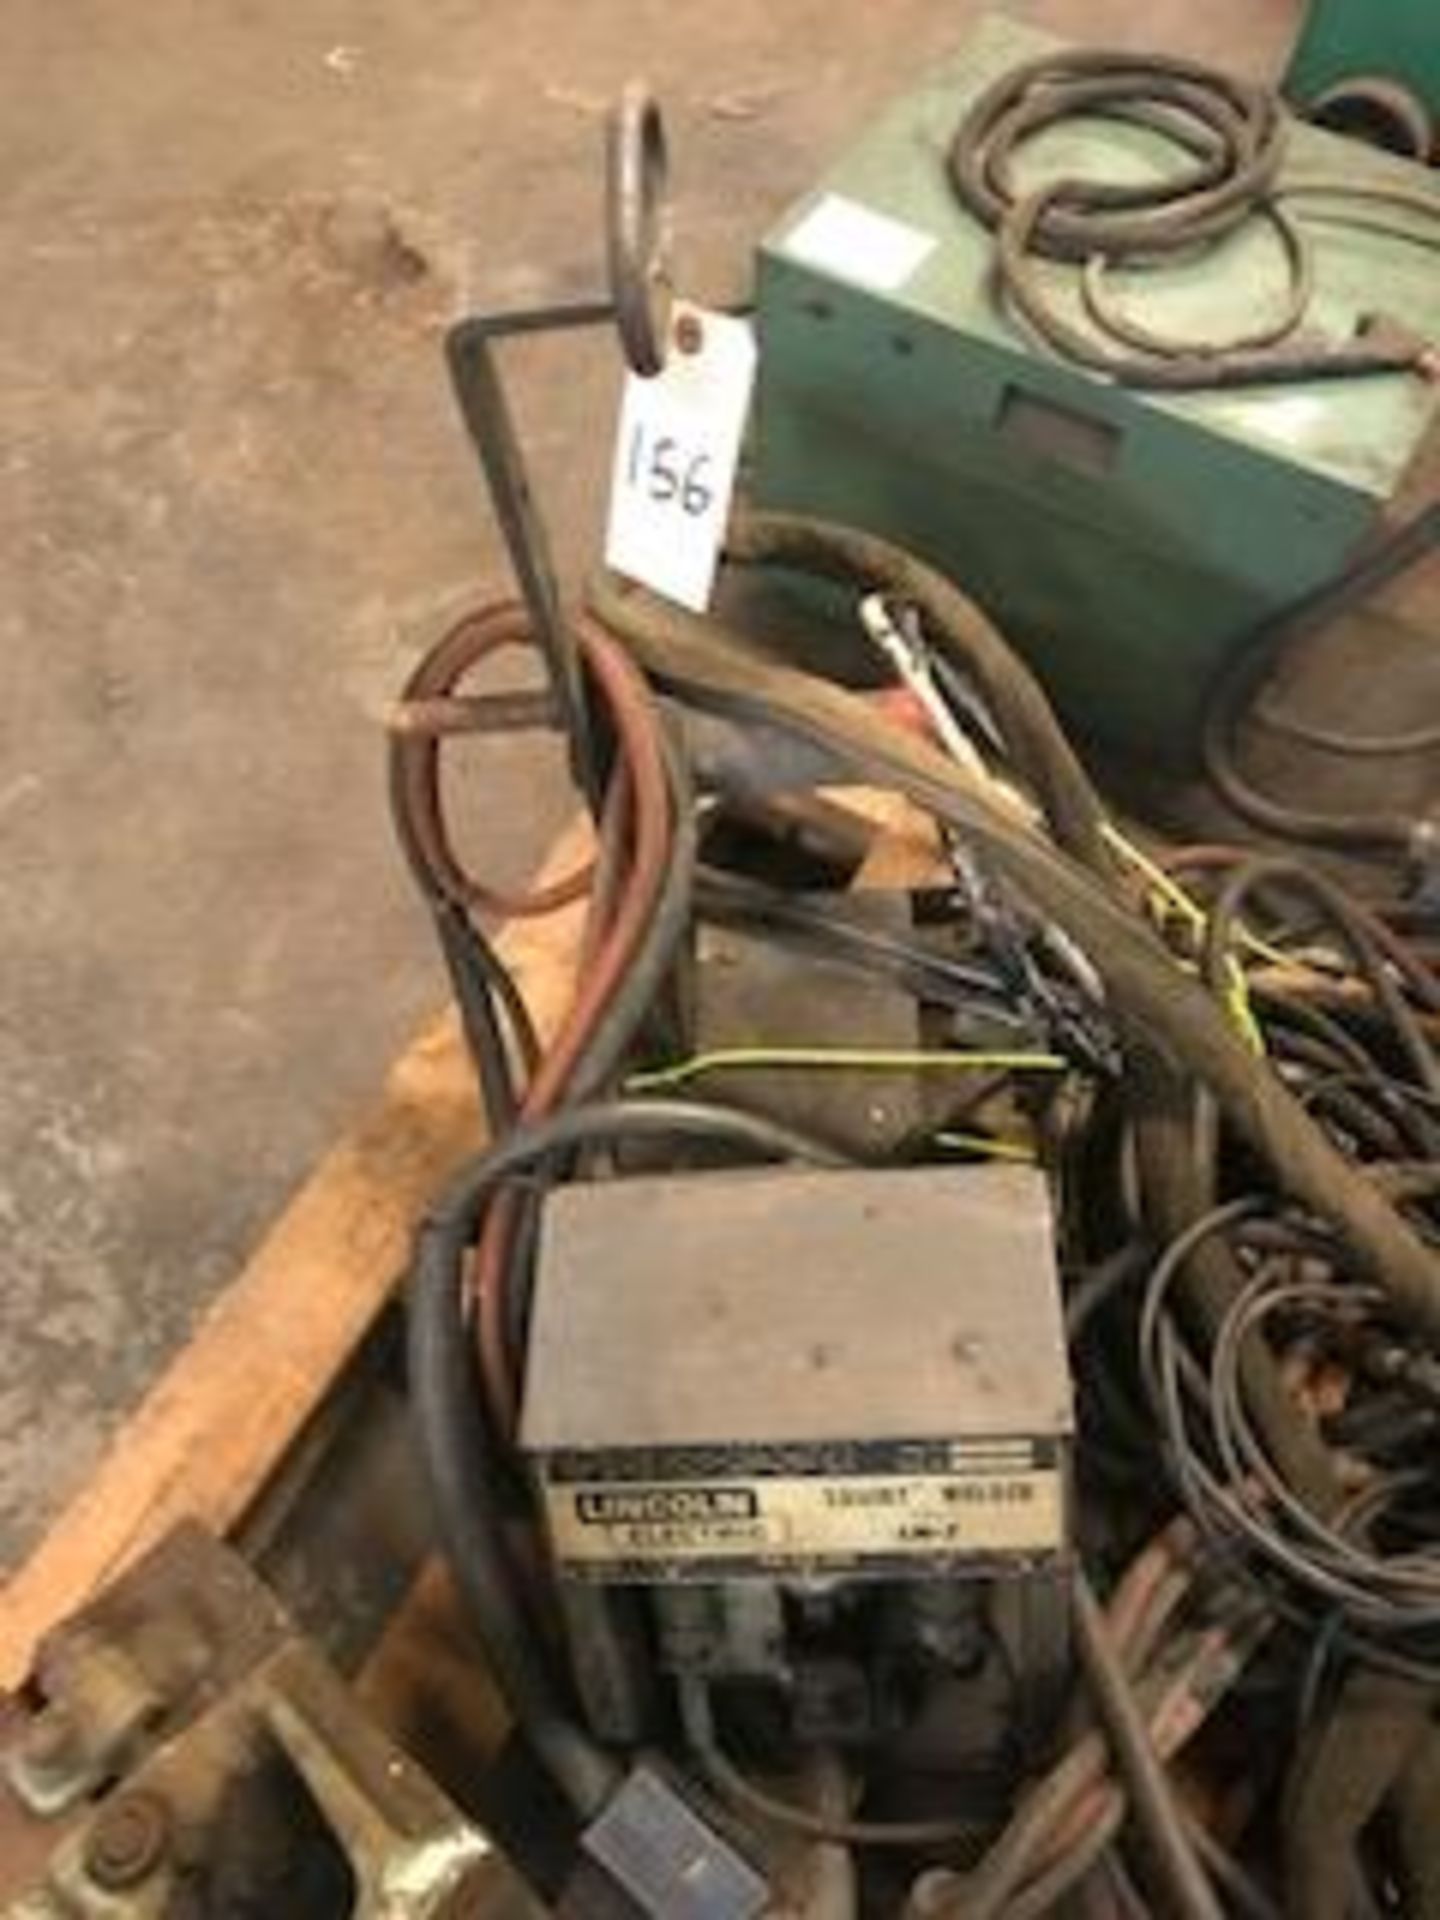 LINCOLN SQUIRT WELDER W/ LN-7 FEED